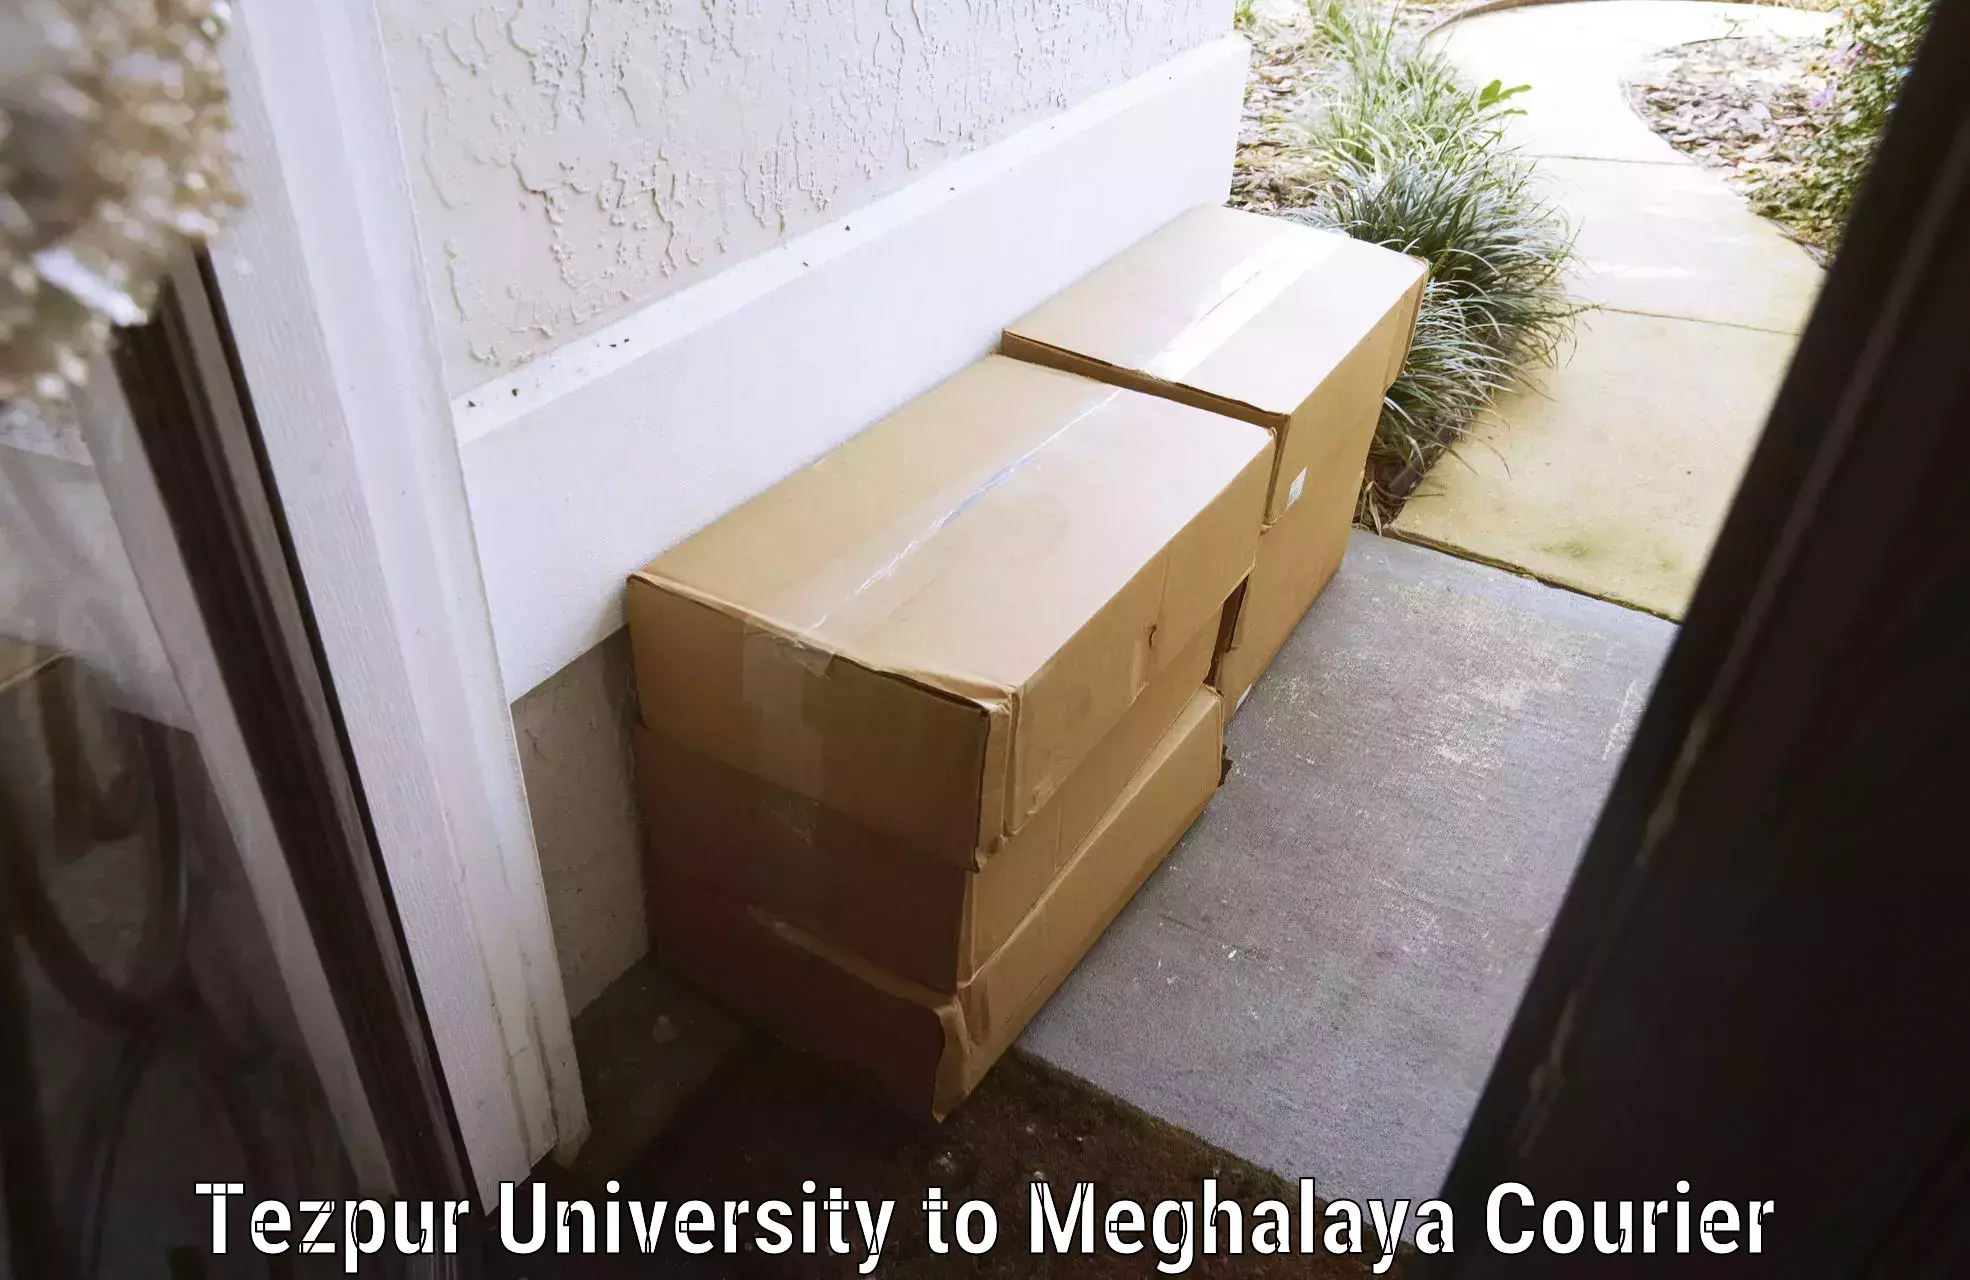 Luggage shipment tracking in Tezpur University to Nongstoin